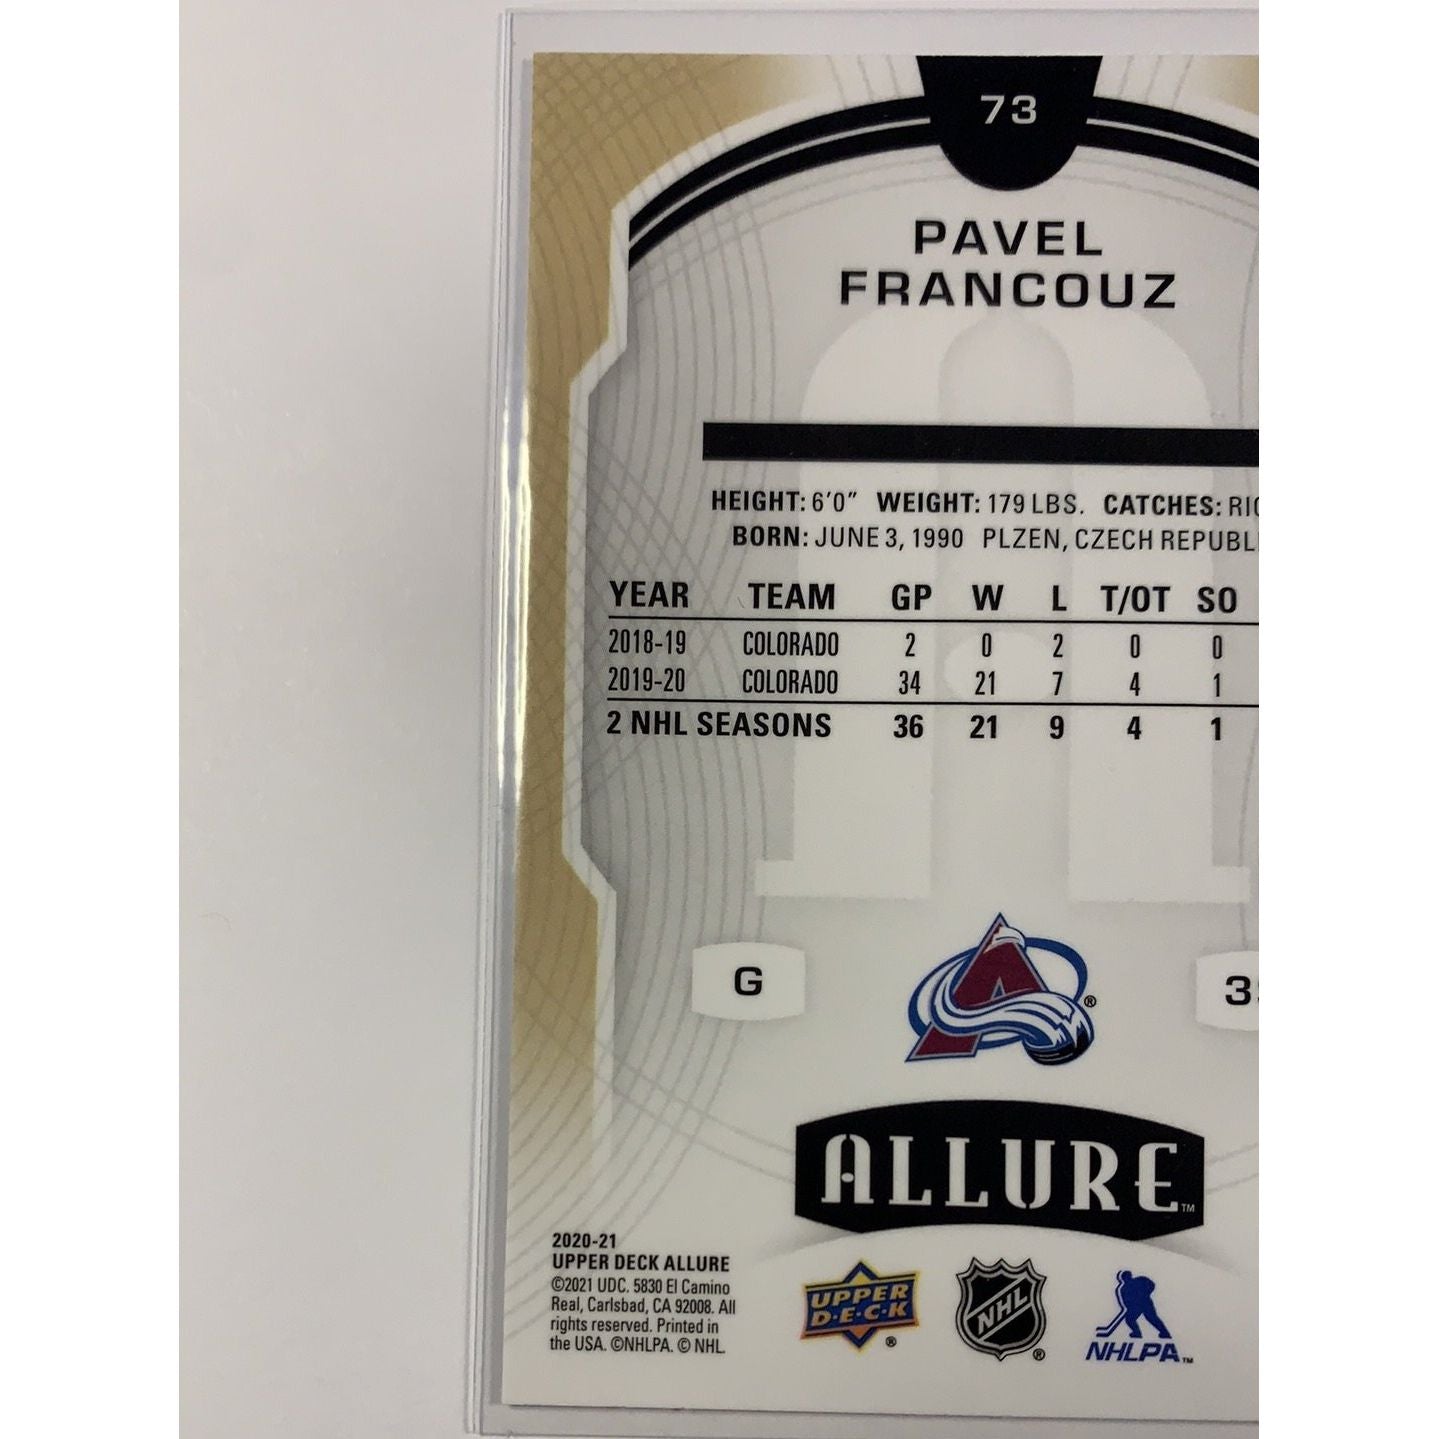  2020-21 Allure Pavel Francouz Rookie  Local Legends Cards & Collectibles